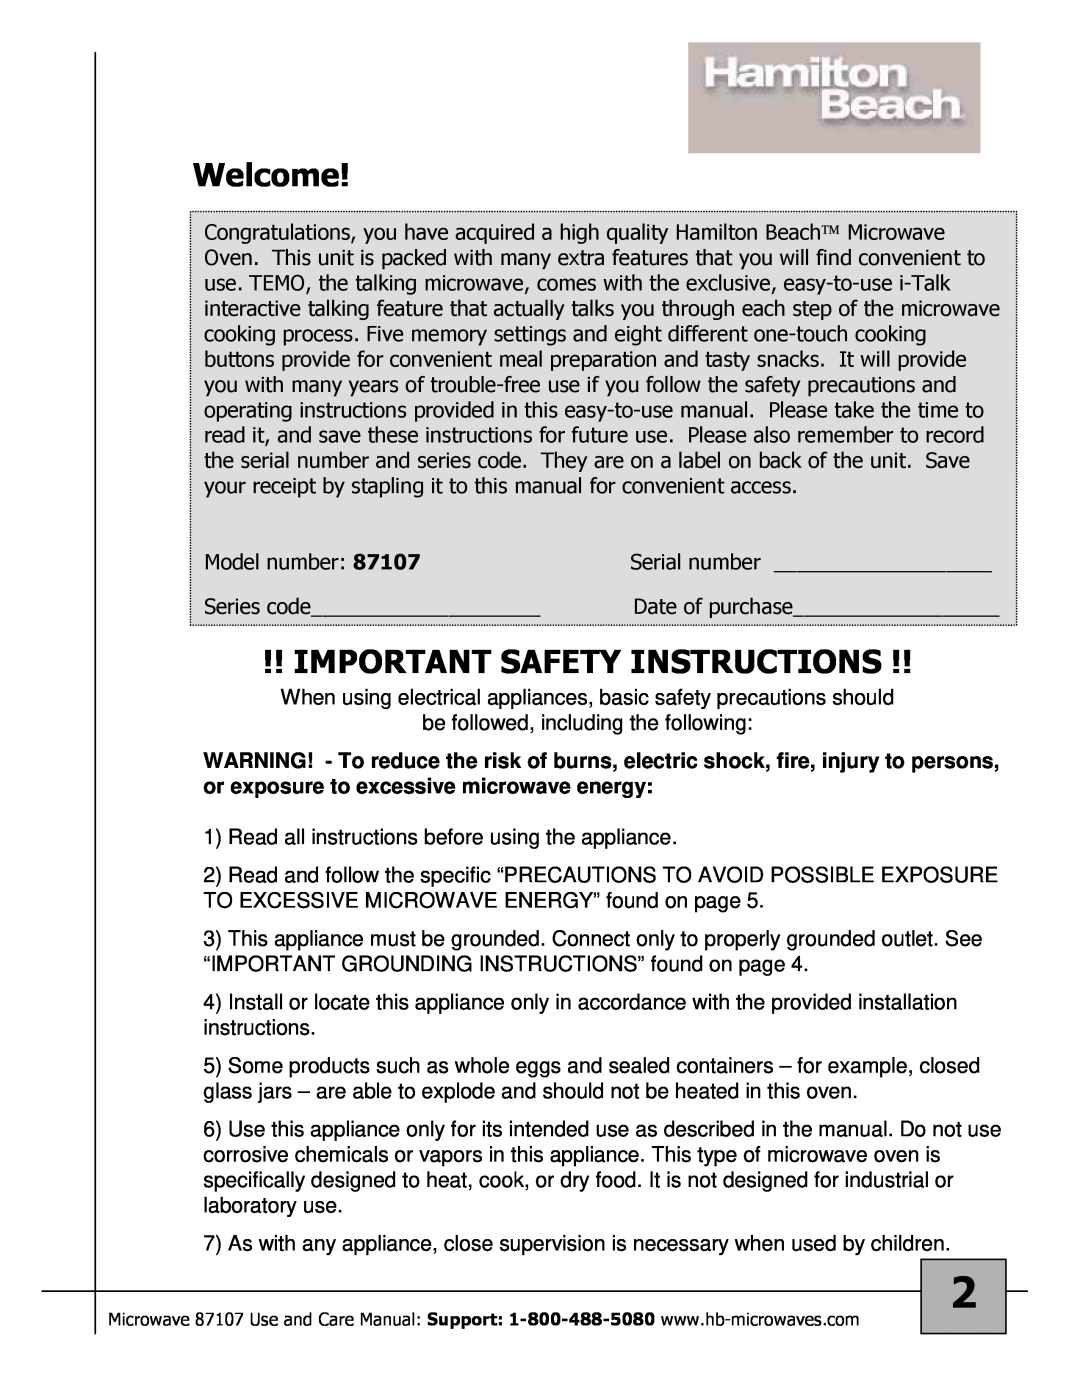 Hamilton Beach 87107 owner manual Welcome, Important Safety Instructions 